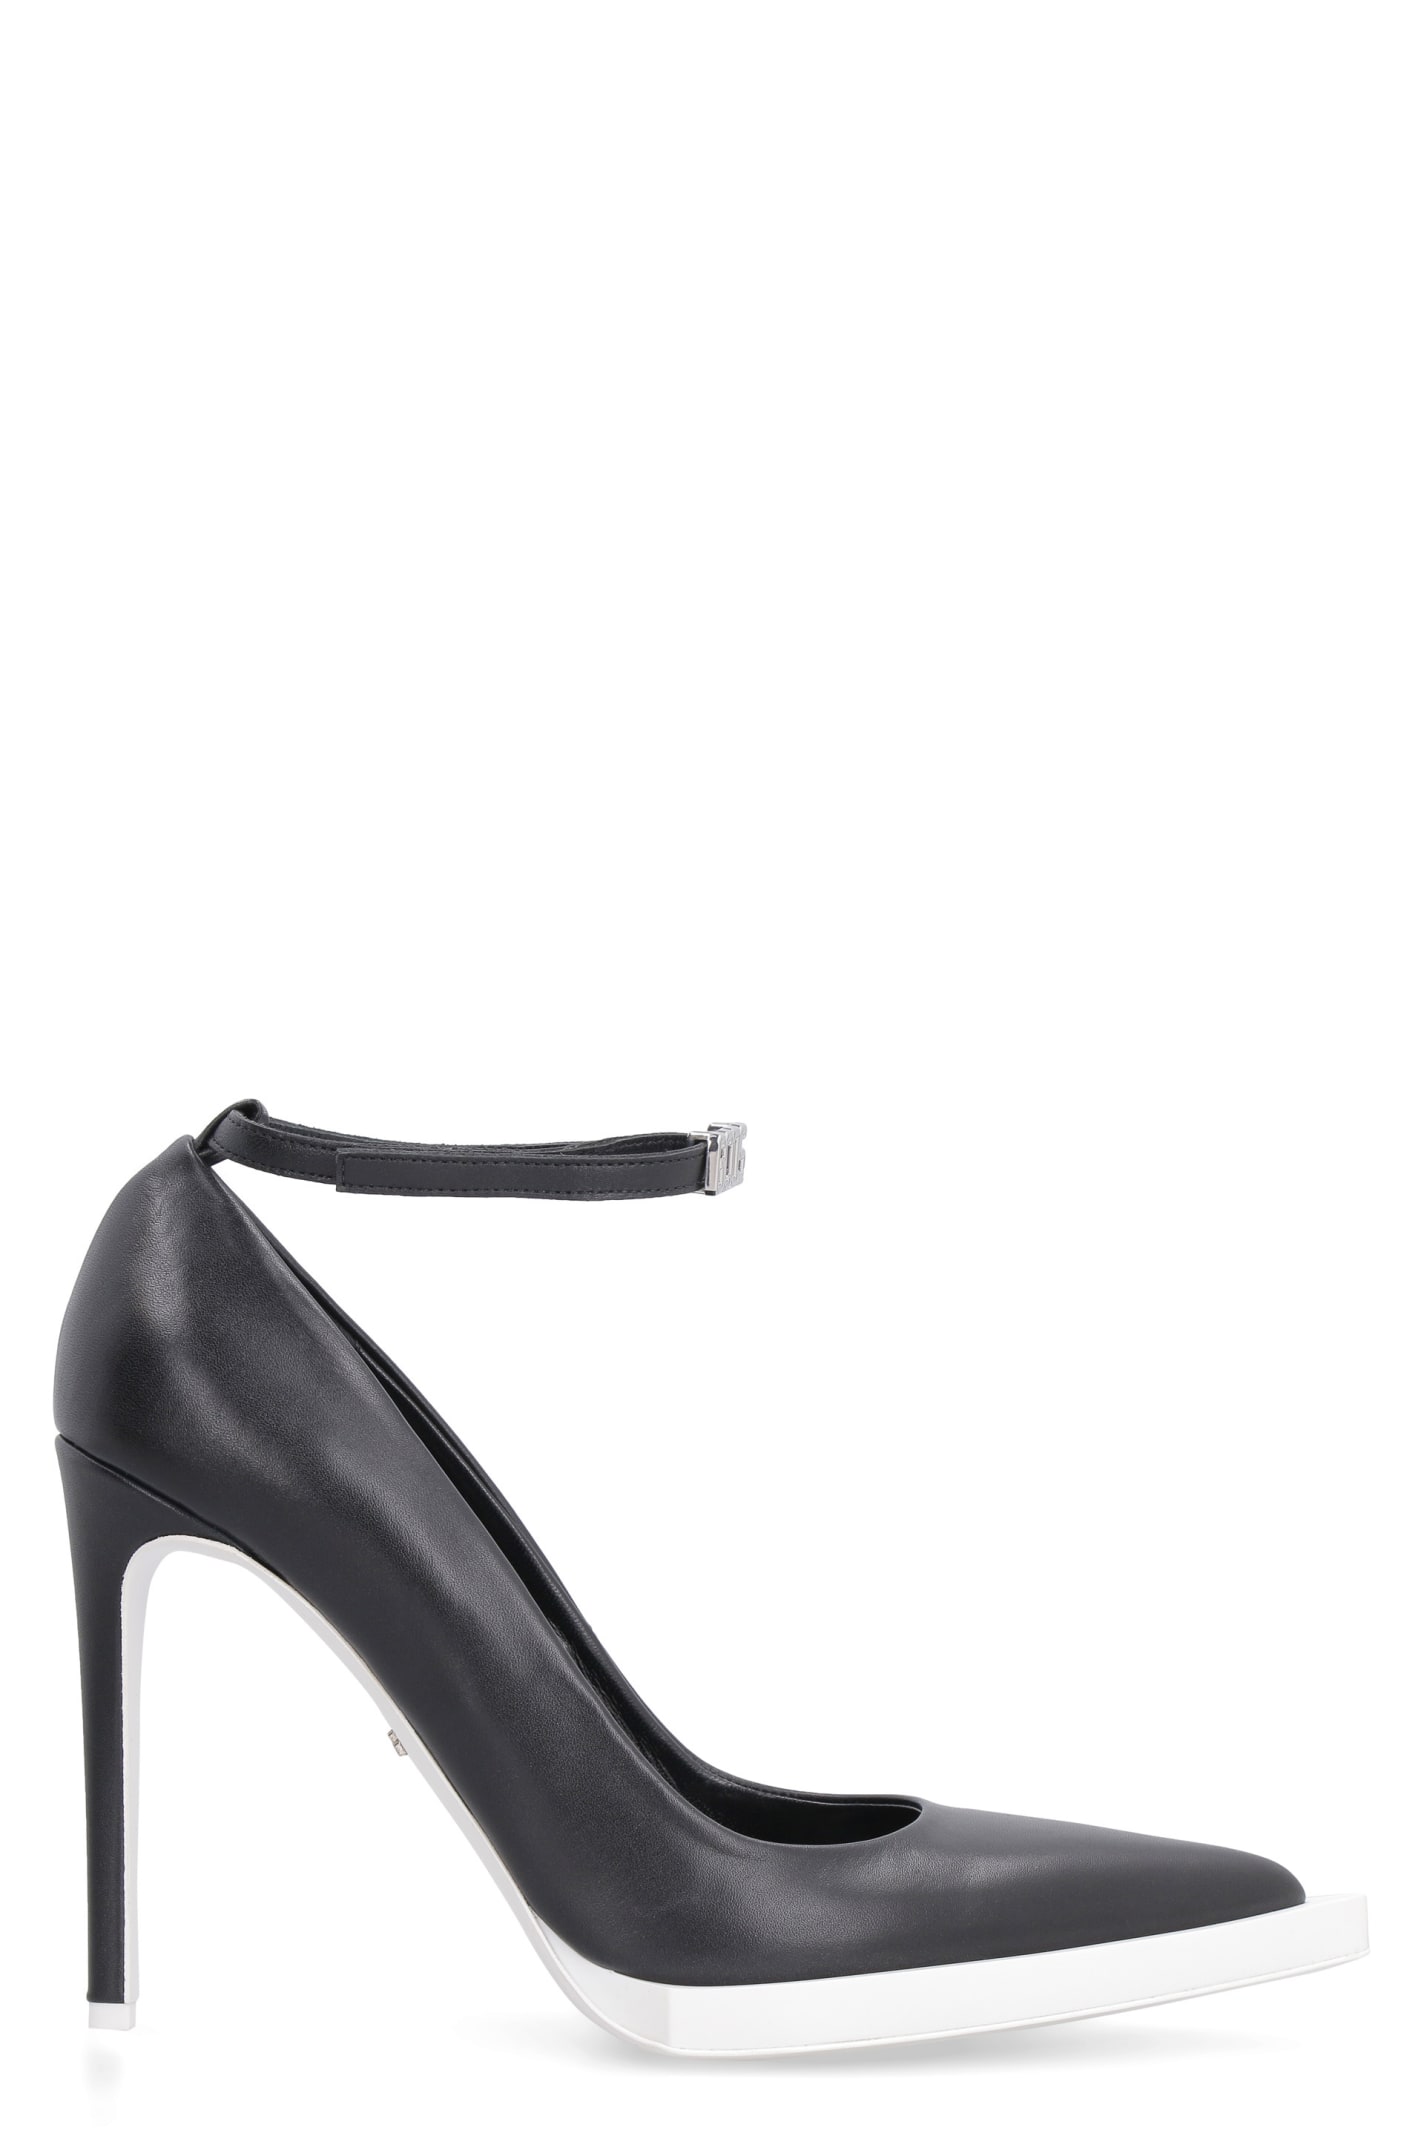 GCDS Rider Leather Pointy-toe Pumps